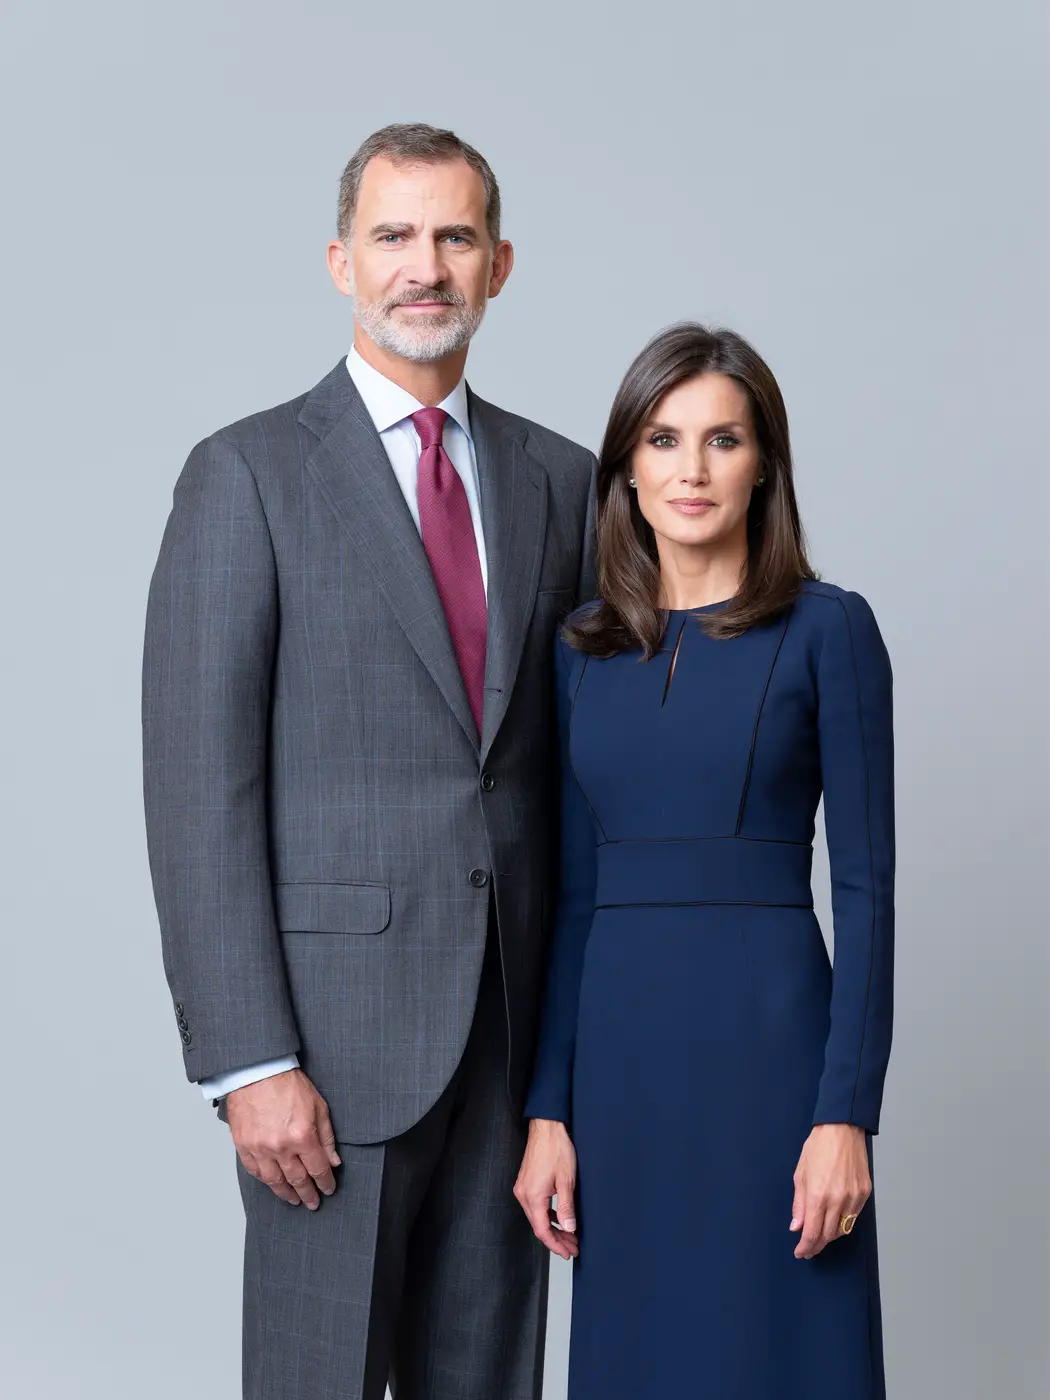 King Felipe and Queen Letizia's official portraits released by the palace